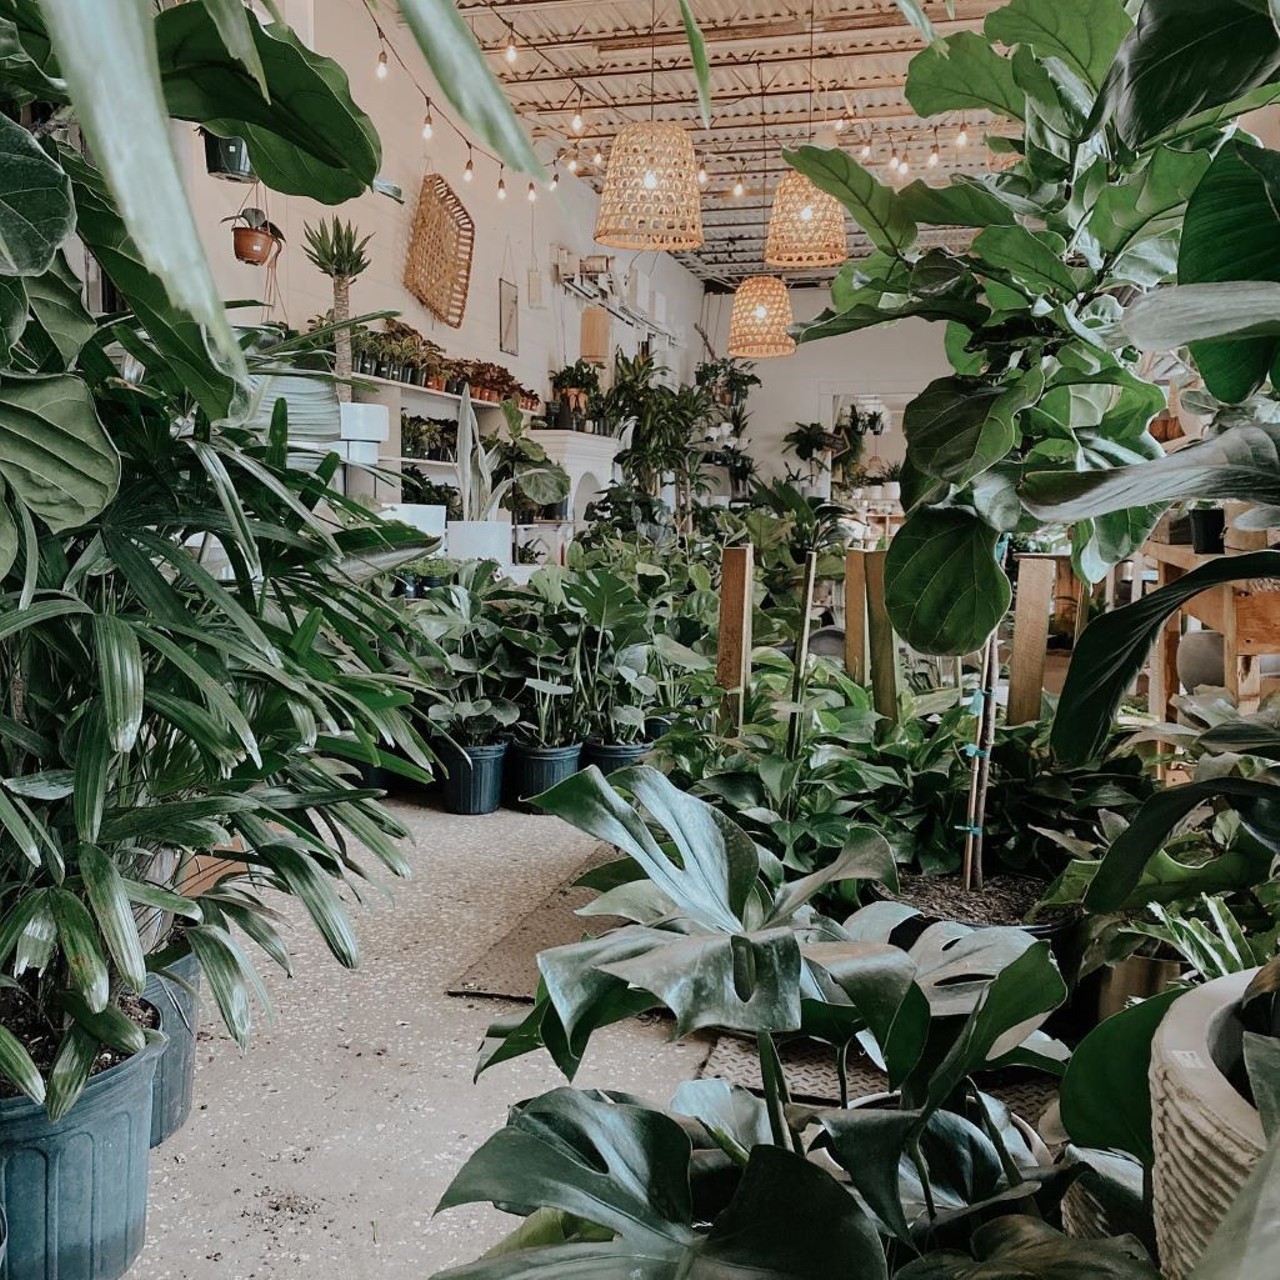 The Heavy 
1152 Harmon Ave., Winter Park
It&#146;s no secret why the Heavy has become known as &#147;Winter Park&#146;s happy place.&#148; Between its coffee bar, myriad of plants, and hand-picked decor, the Heavy is a must-visit in Winter Park. 
Photo via The Heavy/Facebook